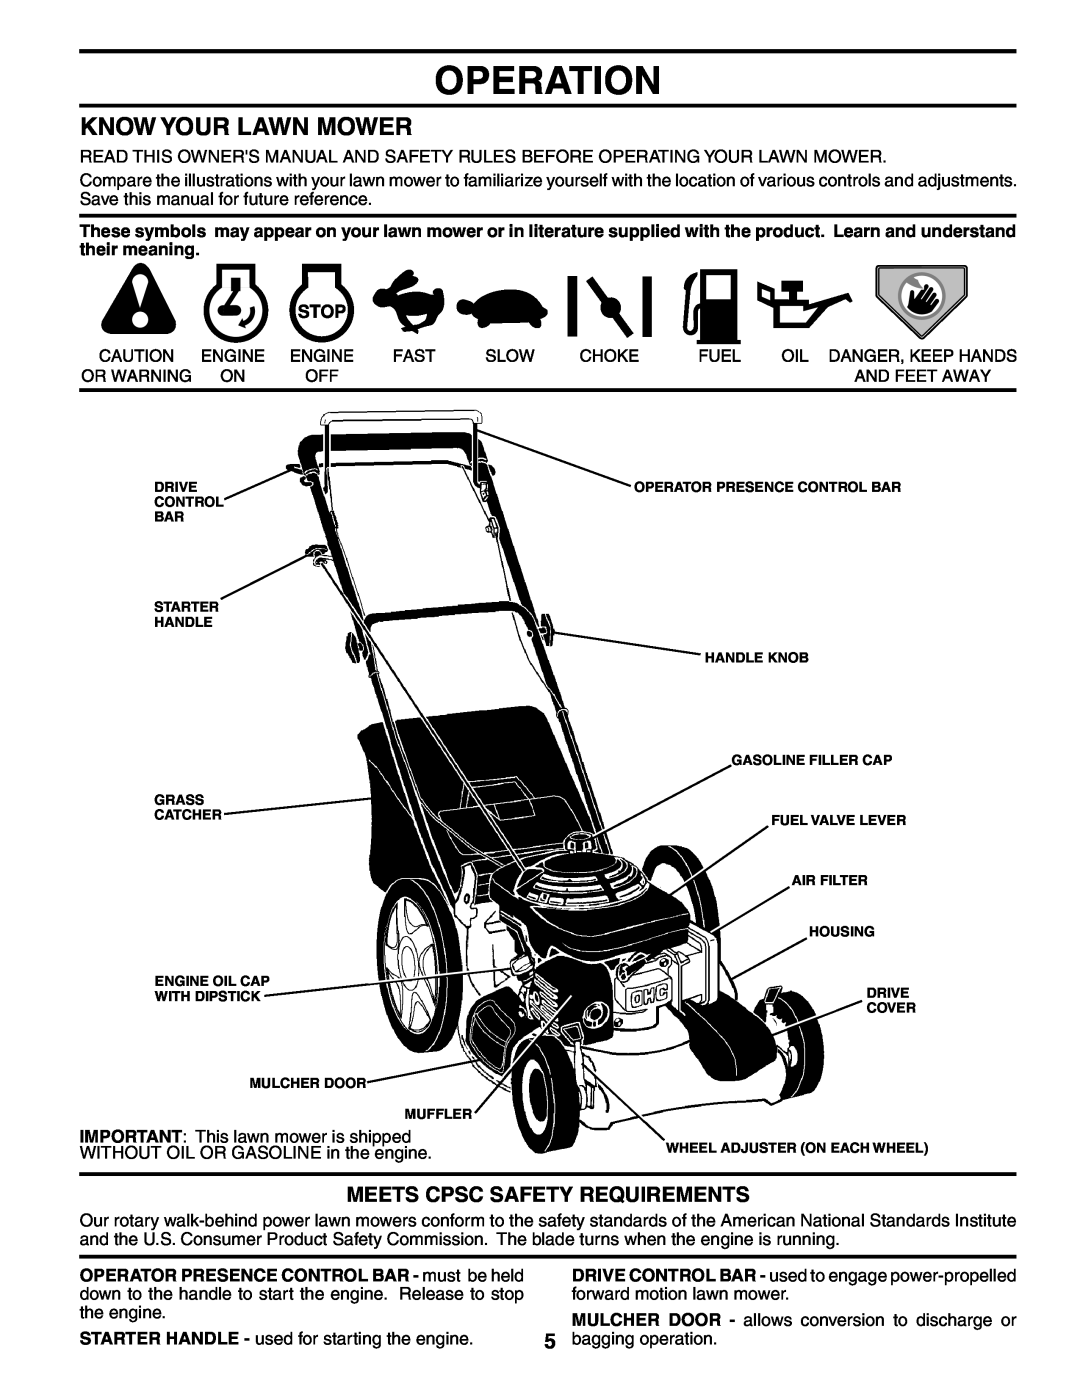 Husqvarna 5521CHV owner manual Operation, Know Your Lawn Mower, Meets Cpsc Safety Requirements 